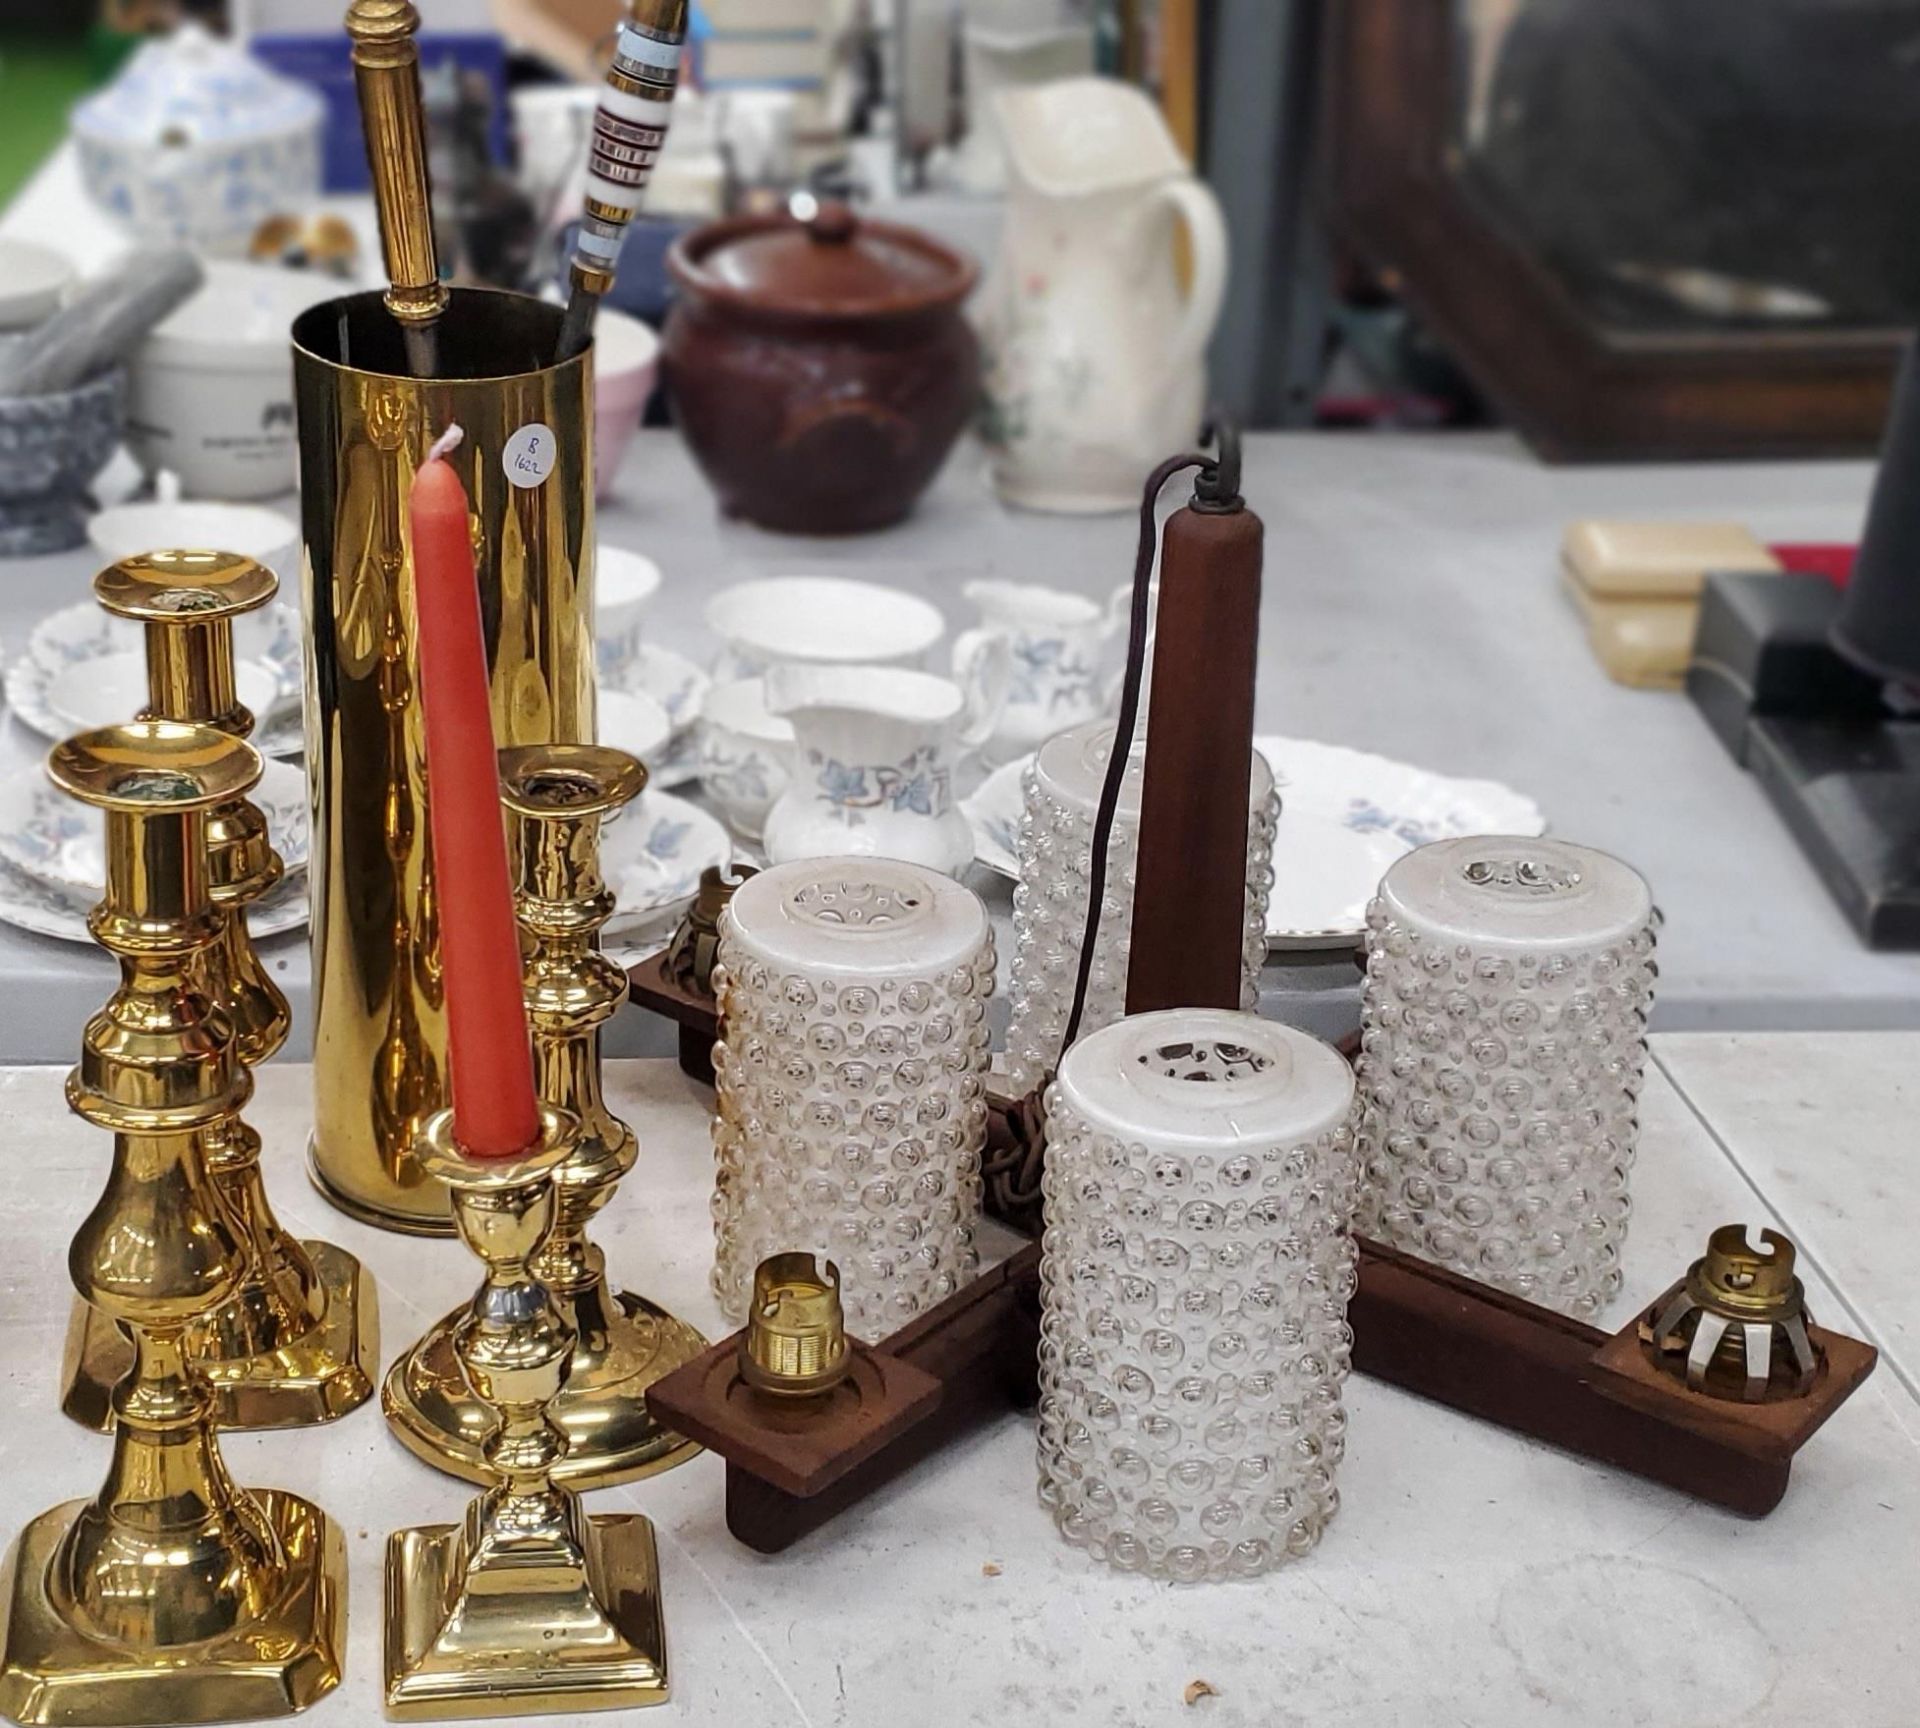 A MIXED LOT OF BRASS CANDLESTICKS, SHELL CASE AND VINTAGE LIGHT